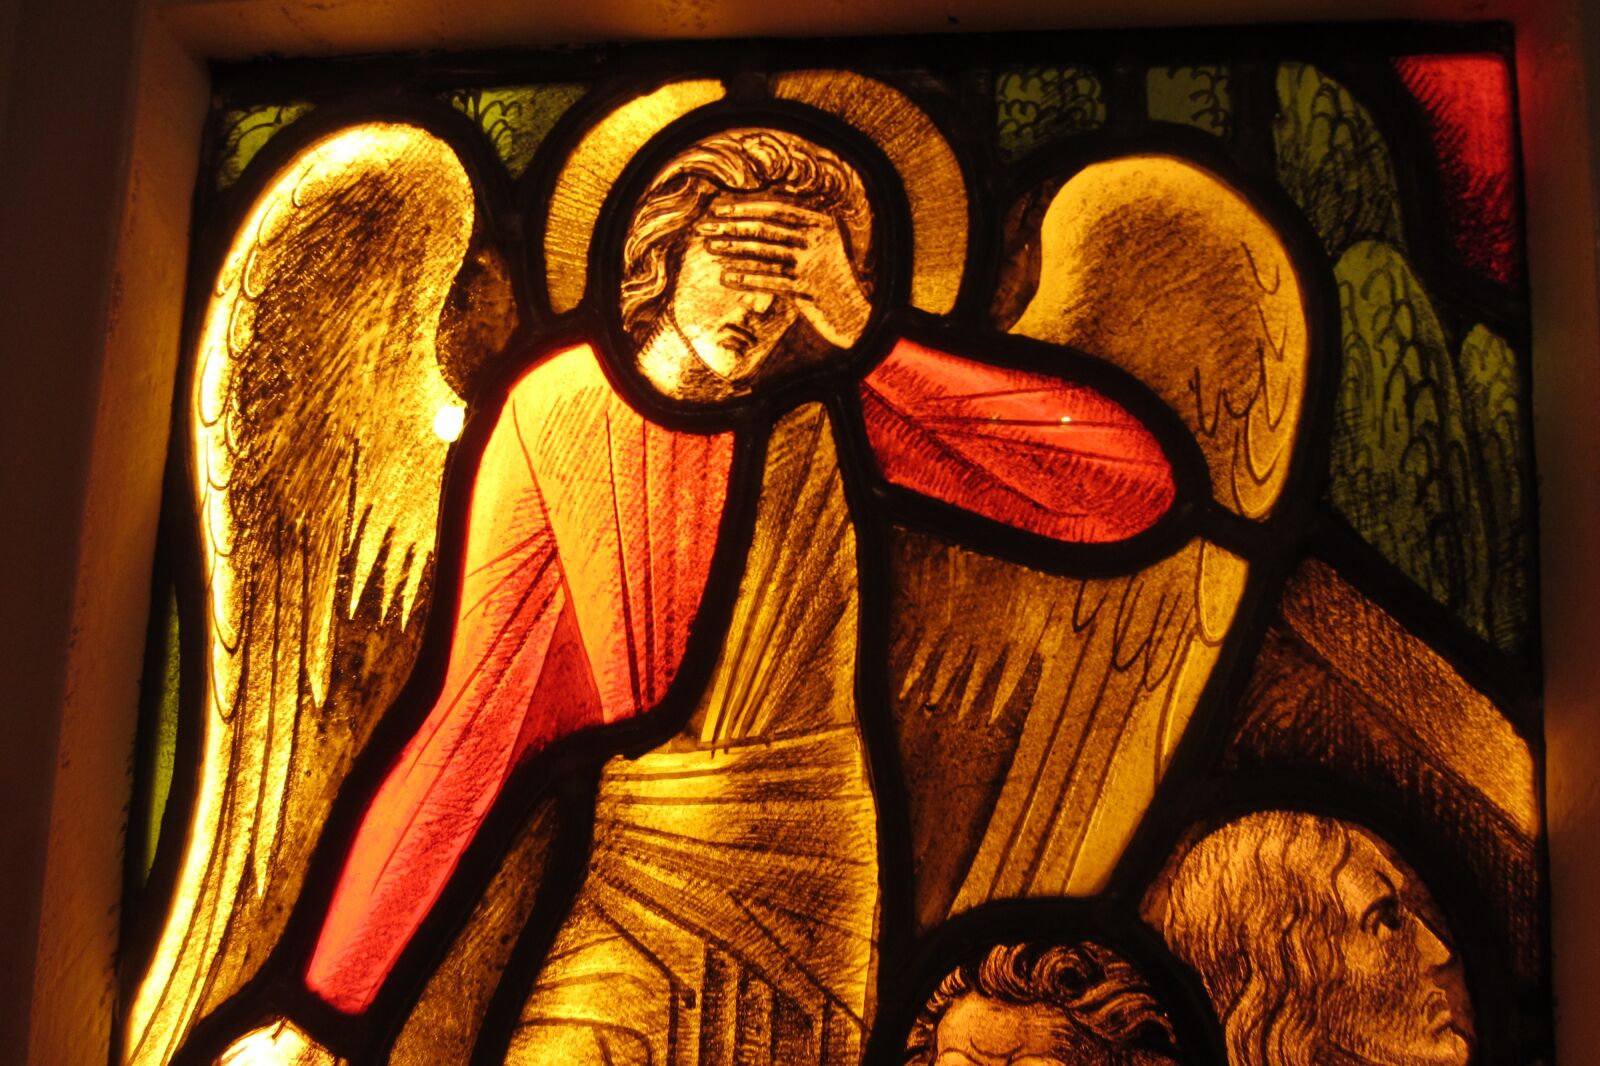 Canon PowerShot ELPH 300 HS (IXUS 220 HS / IXY 410F) sample photo. Angel, stained, glass photography